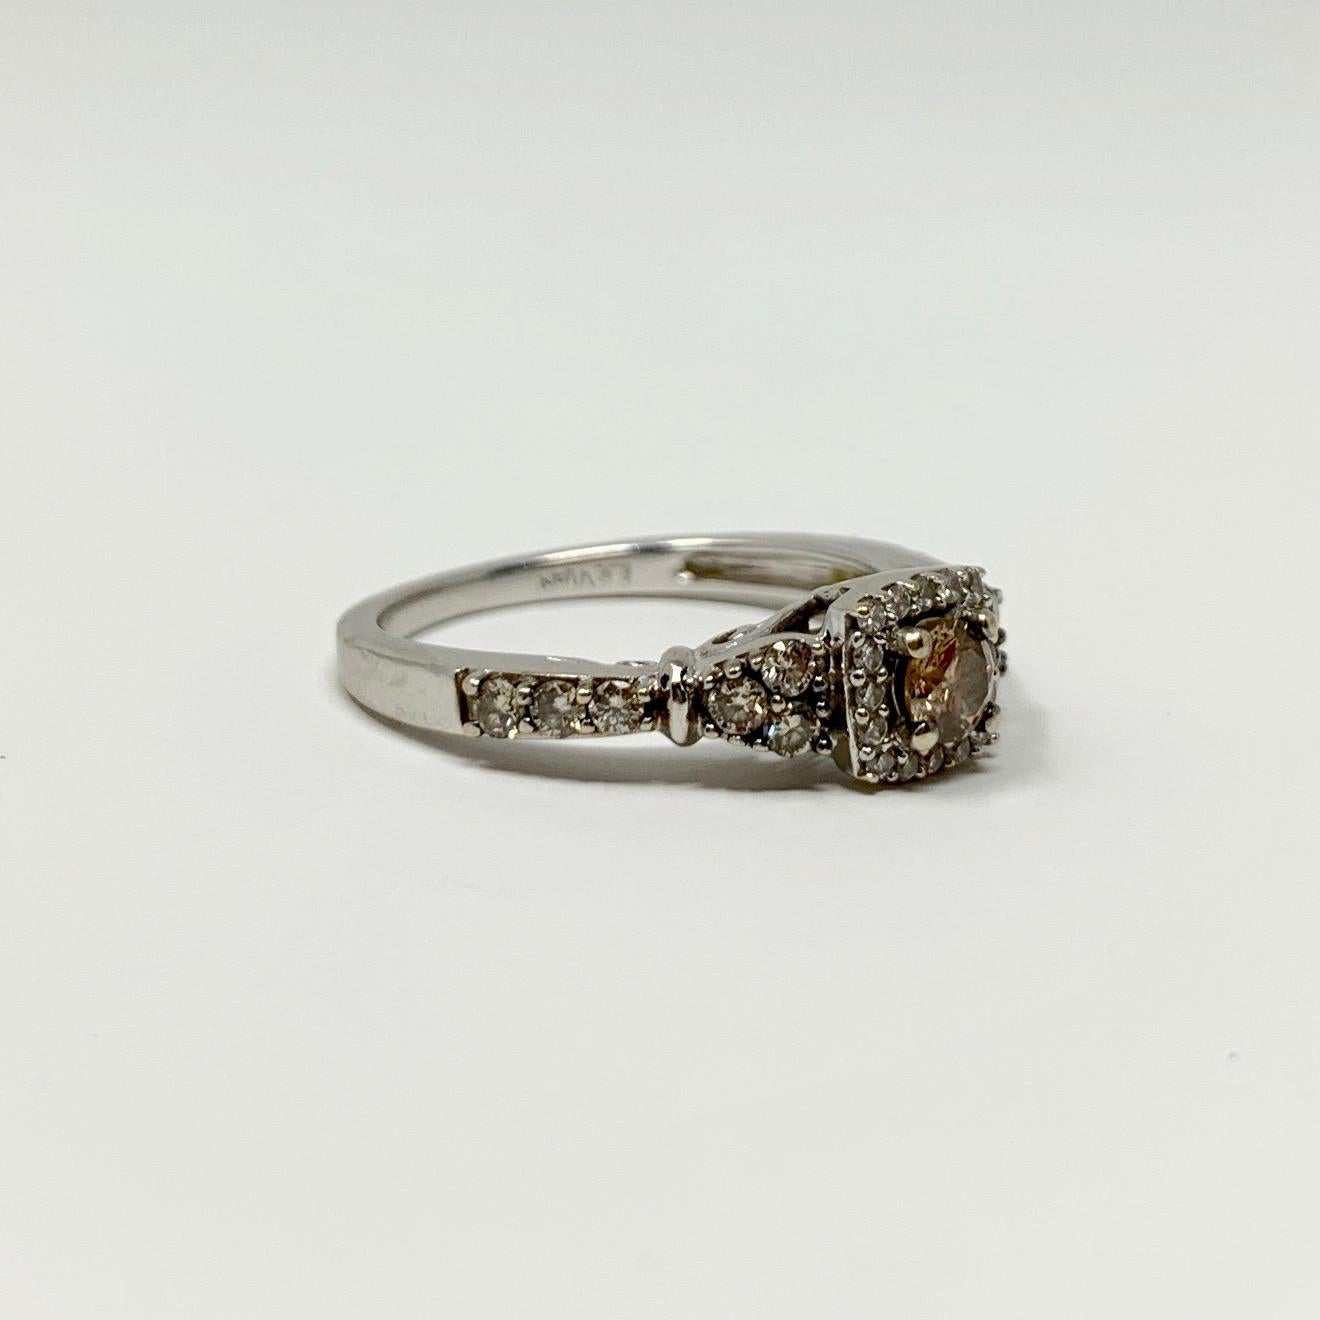 Le Vian 14k White Gold 1/2ct Chocolate and Vanilla Diamond Ring Size 6.5

Condition:  Excellent (Professionally Cleaned and Polished)
Metal:  14k Gold (Marked, and Professionally Tested)
Weight:  3g
Size:  6.5
Band Width:  1.5mm 
Ring Height (Off